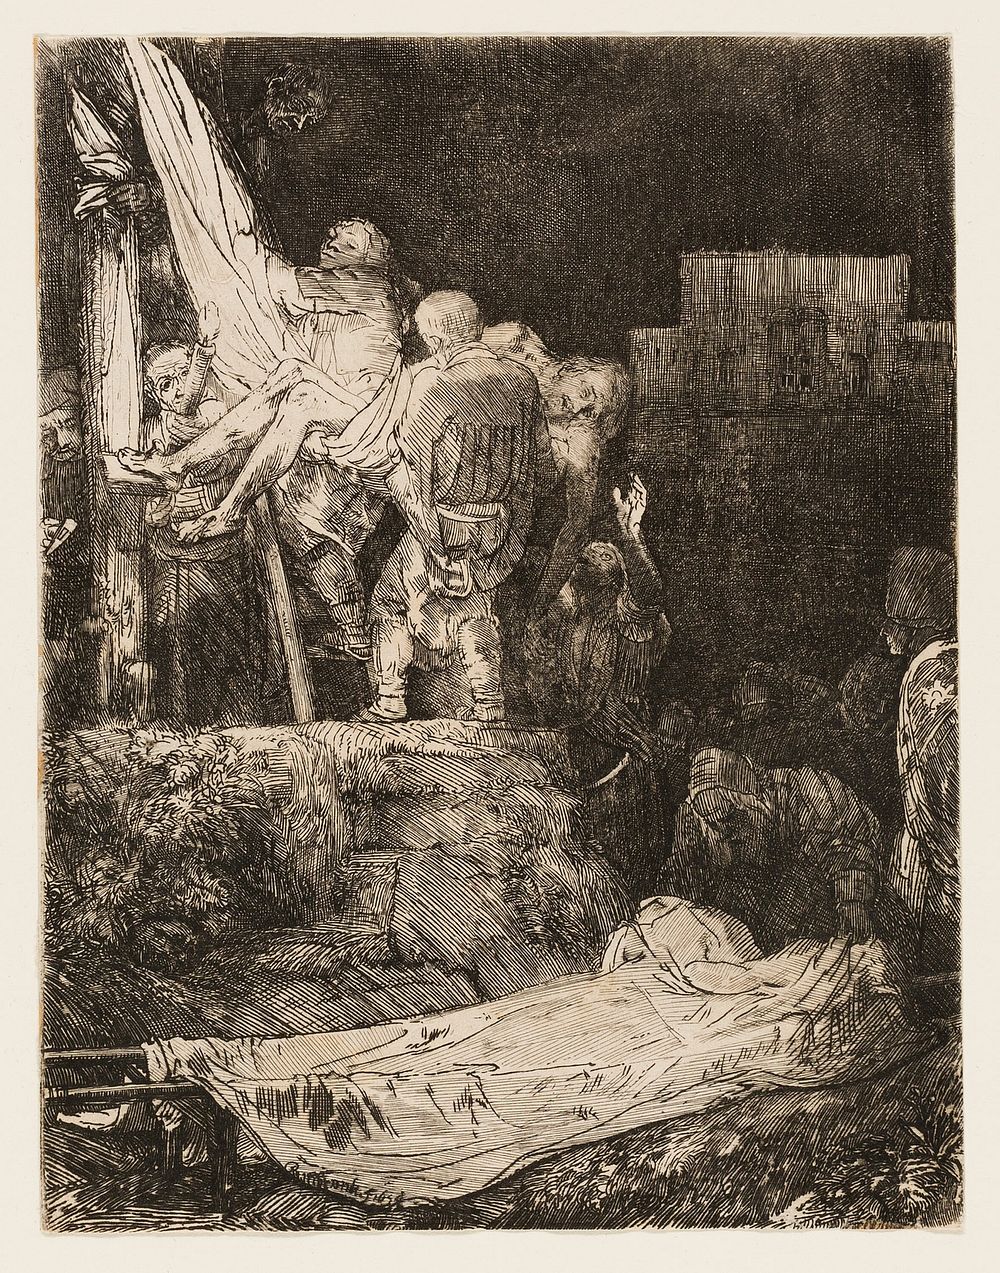 The Descent from the Cross by Torchlight by Rembrandt van Rijn